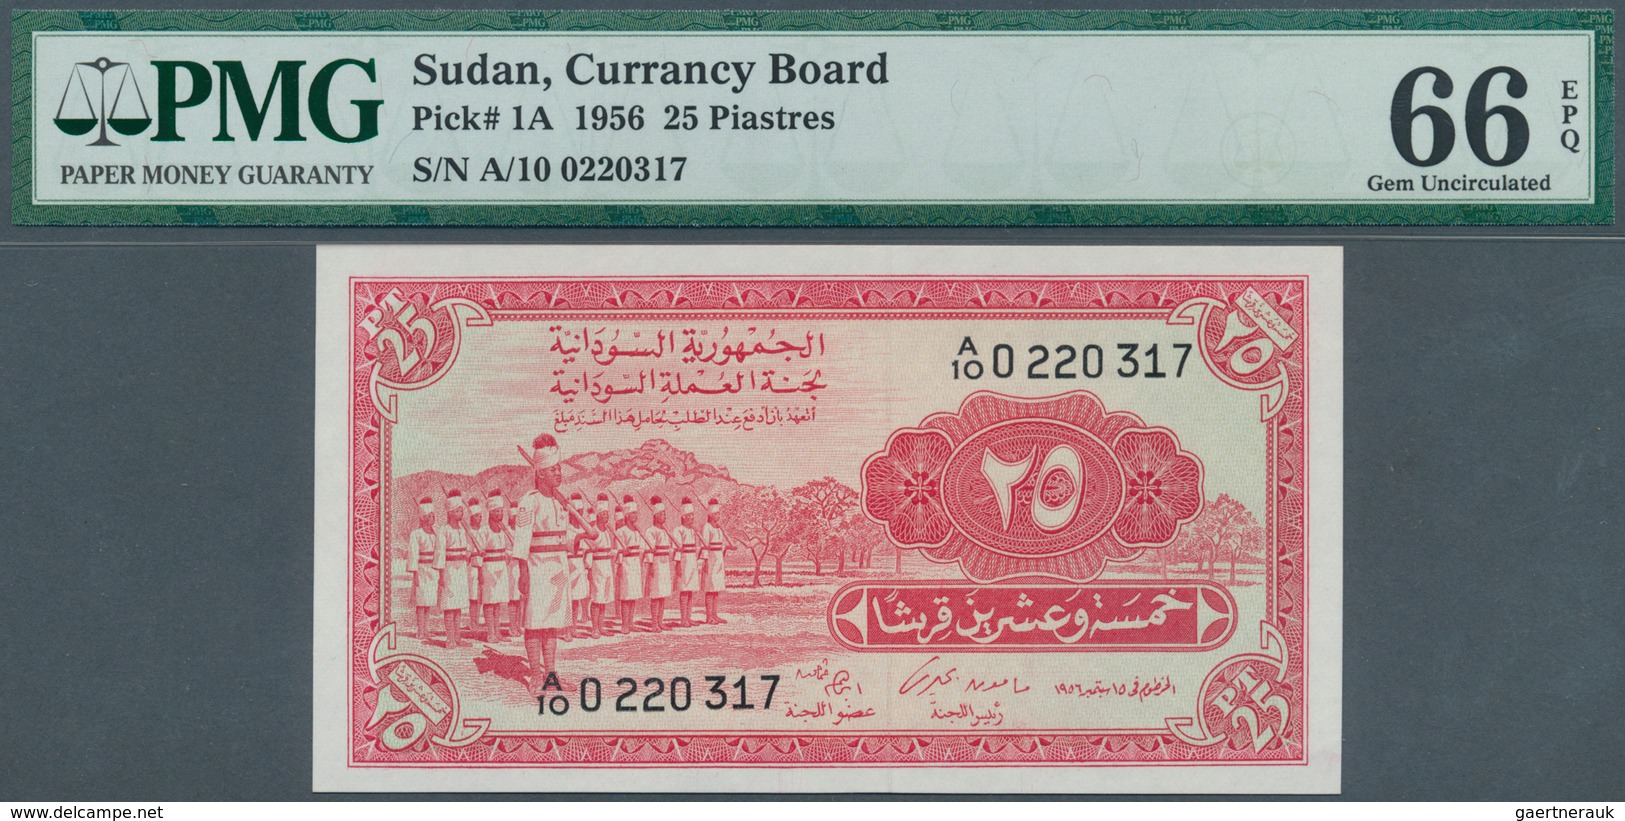 02449 Sudan: Pair Of Two Notes 25 Piastres 1956, P.1A With Running Serial Numbers A/10 0220317 And A/10 02 - Sudan